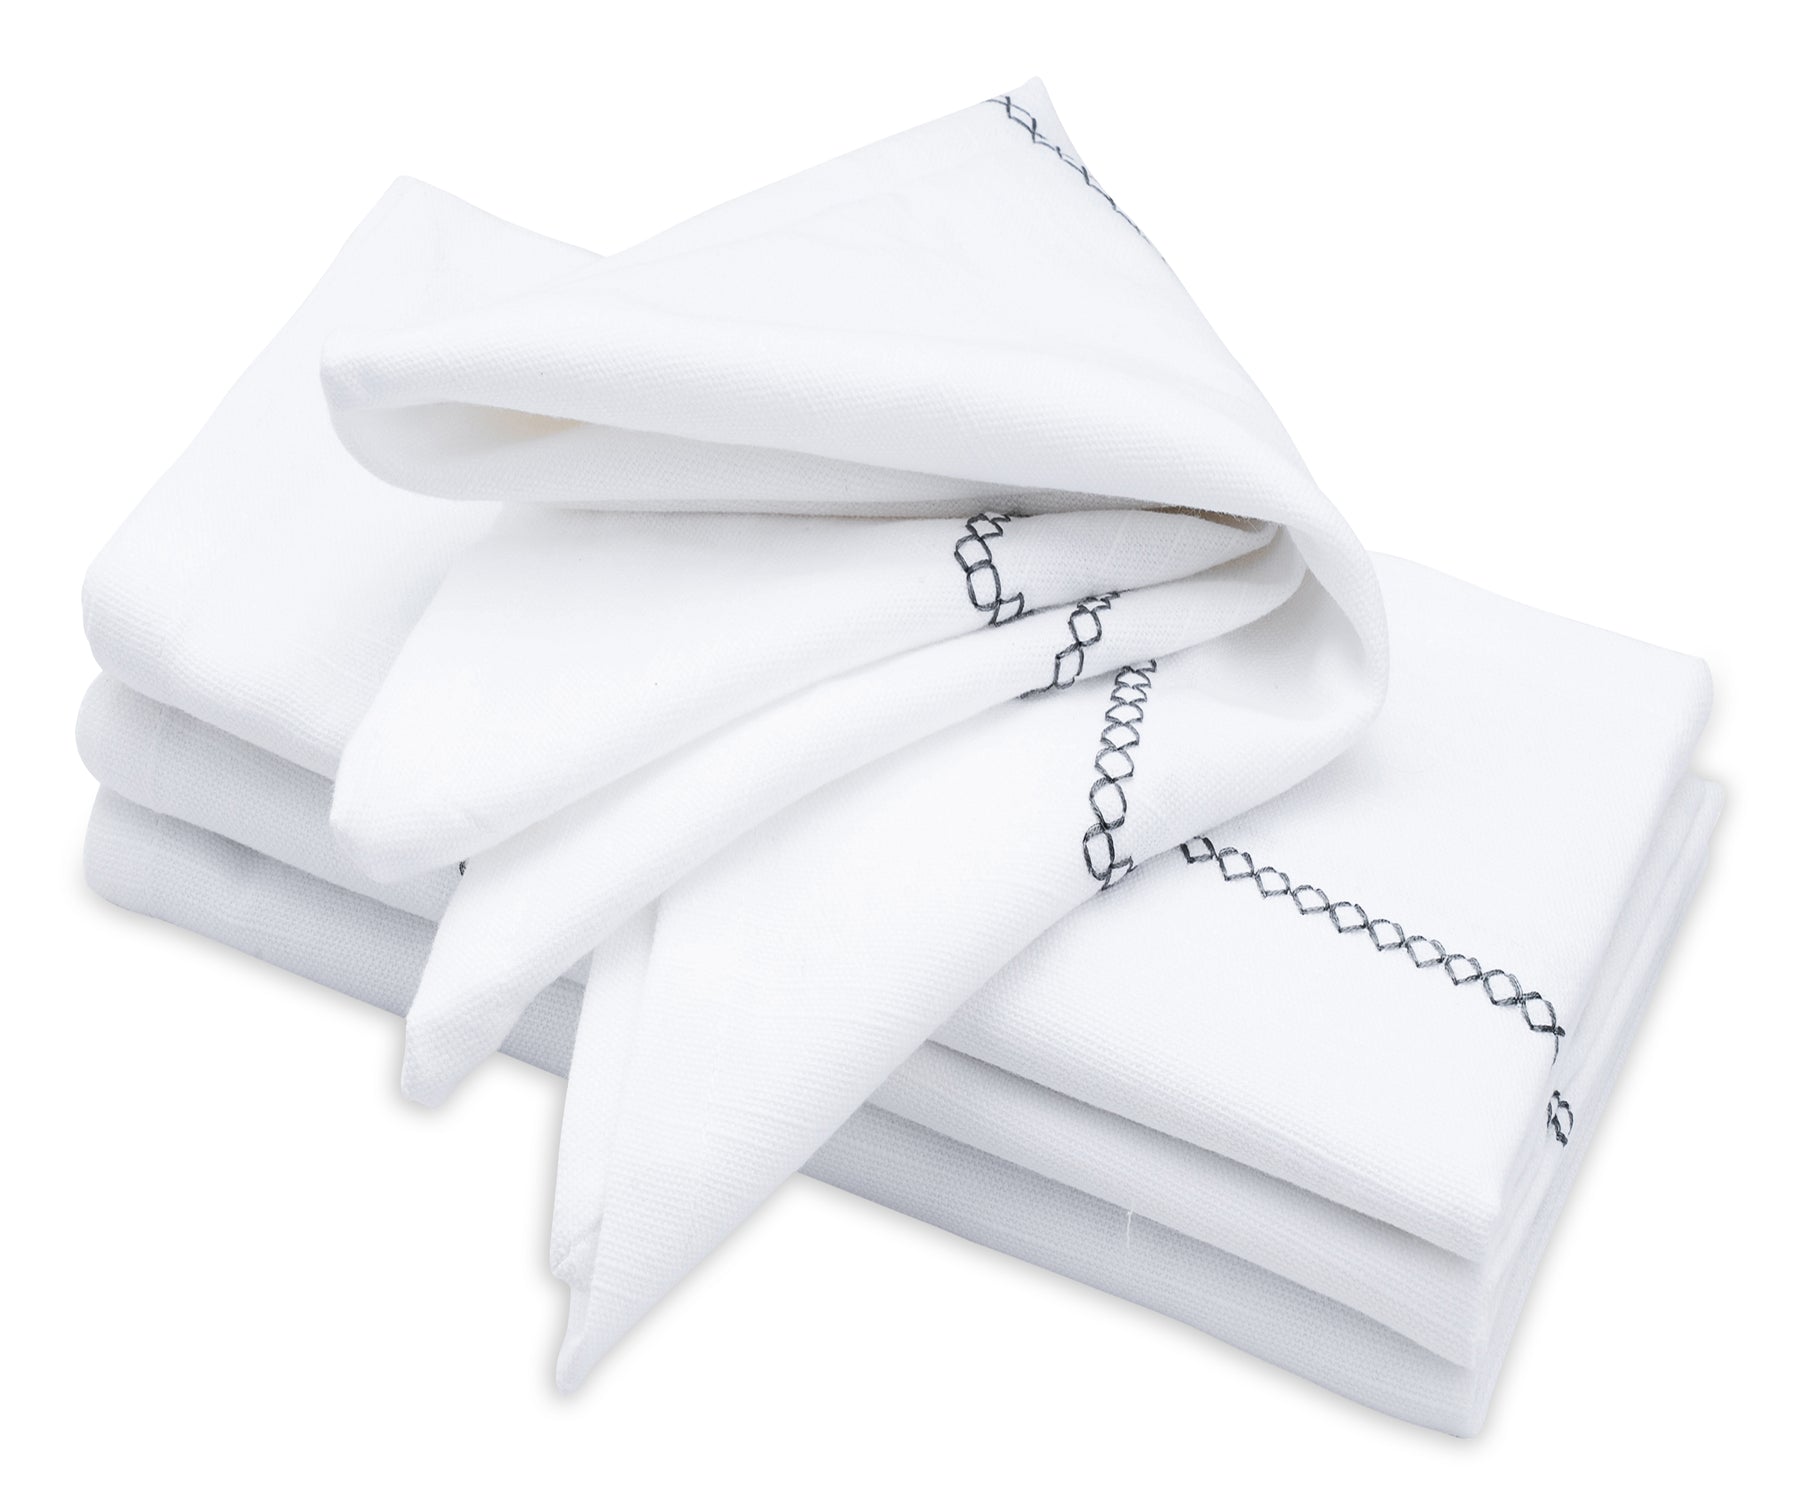 Organic cotton napkins offer comfort and practicality, making them suitable for both formal dinners and casual gatherings.